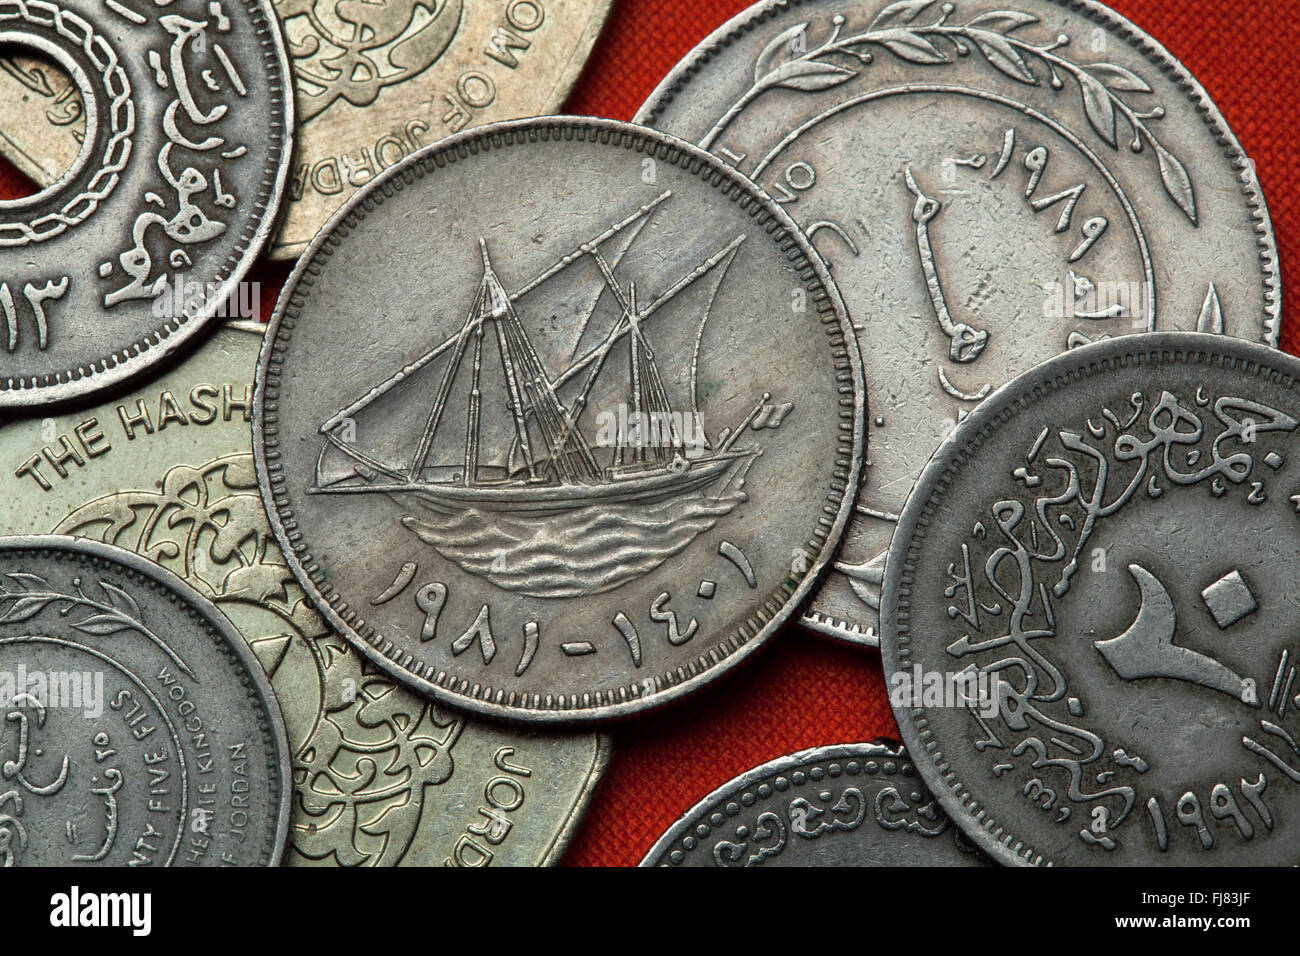 Coins of Kuwait. Traditional Kuwaiti sailing vessel (dhow) called boom depicted in the Kuwaiti 100 fils coin. Stock Photo